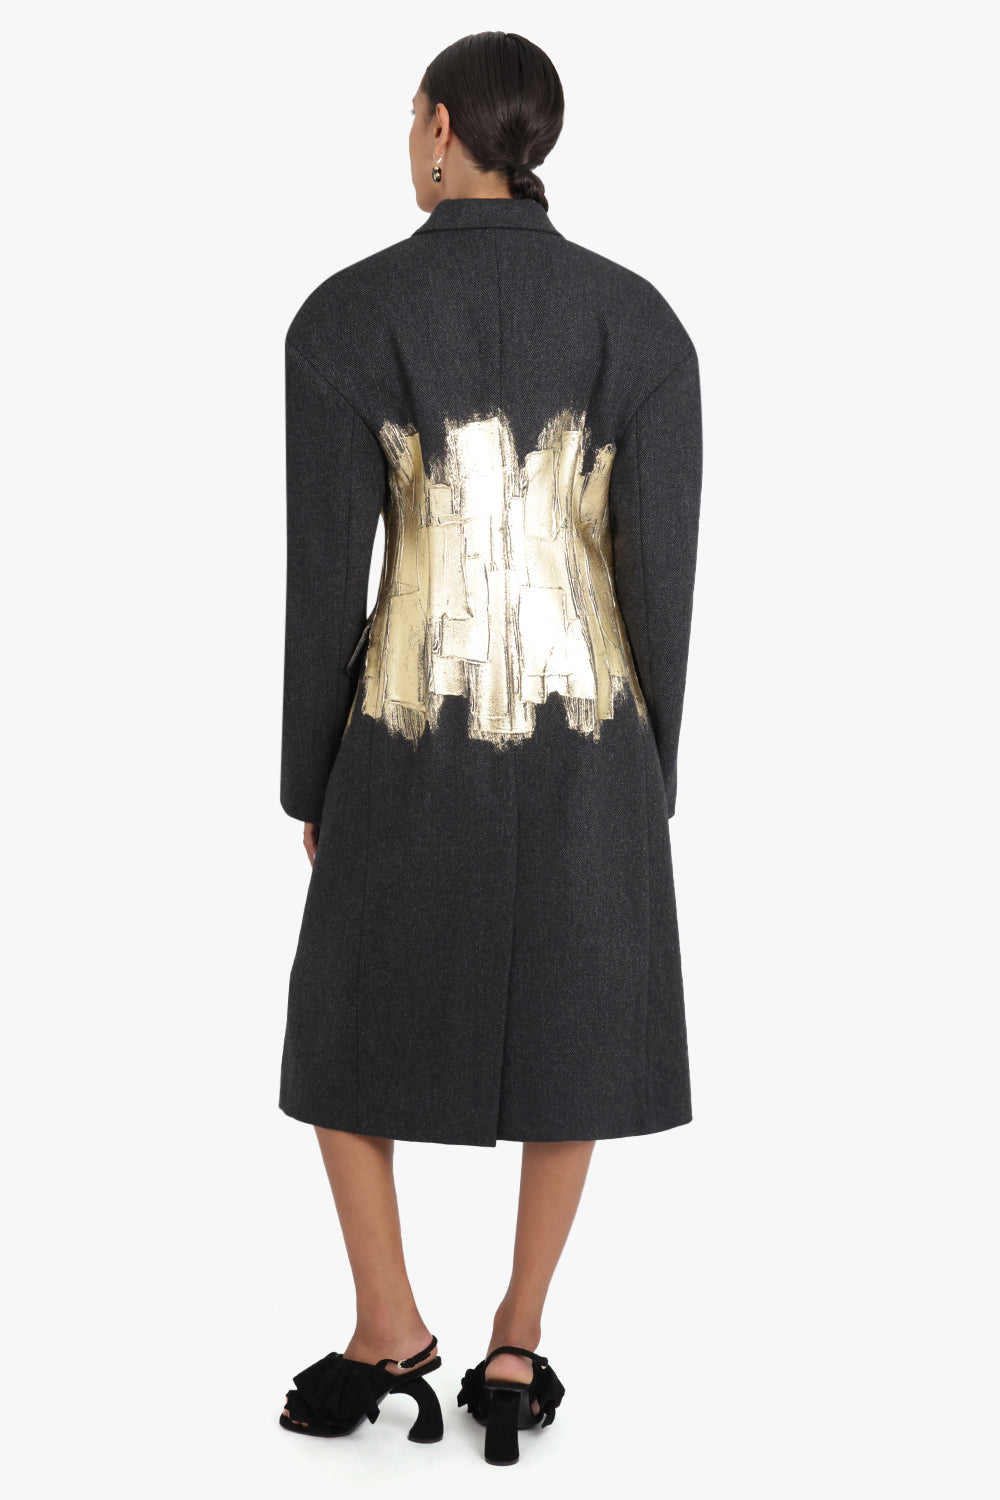 DRIES VAN NOTEN RTW Single Breasted Hand Painted Coat | Anthracite